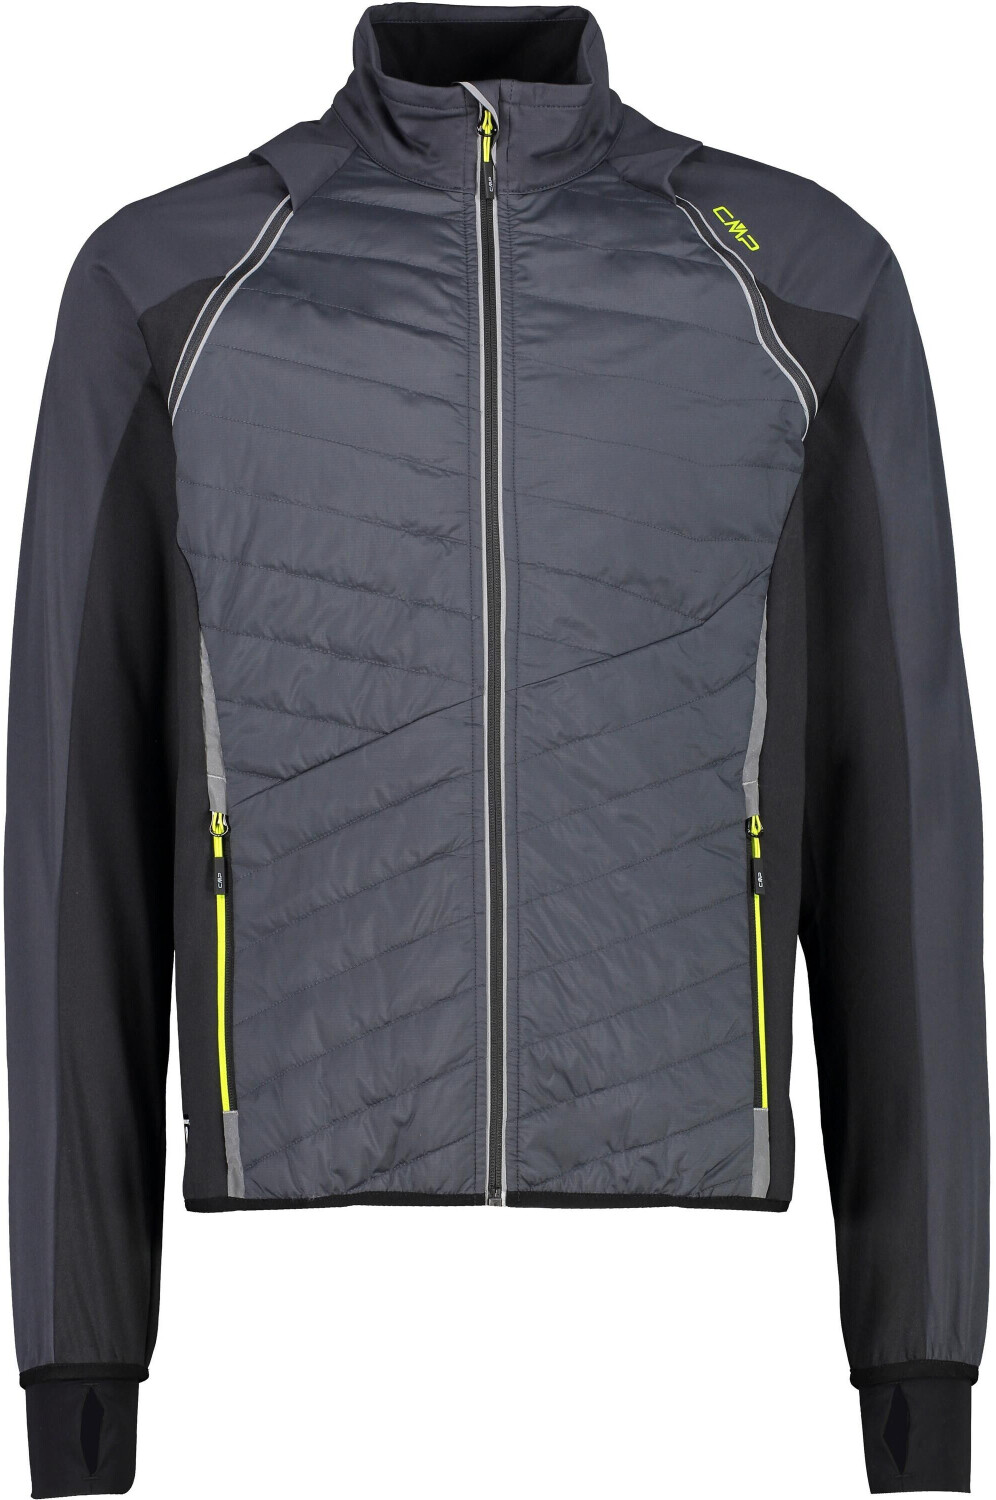 Buy (Today) Sleeves – Deals on Hybrid Best from with Removable jacket Men\'s £51.50 CMP Unlimitech